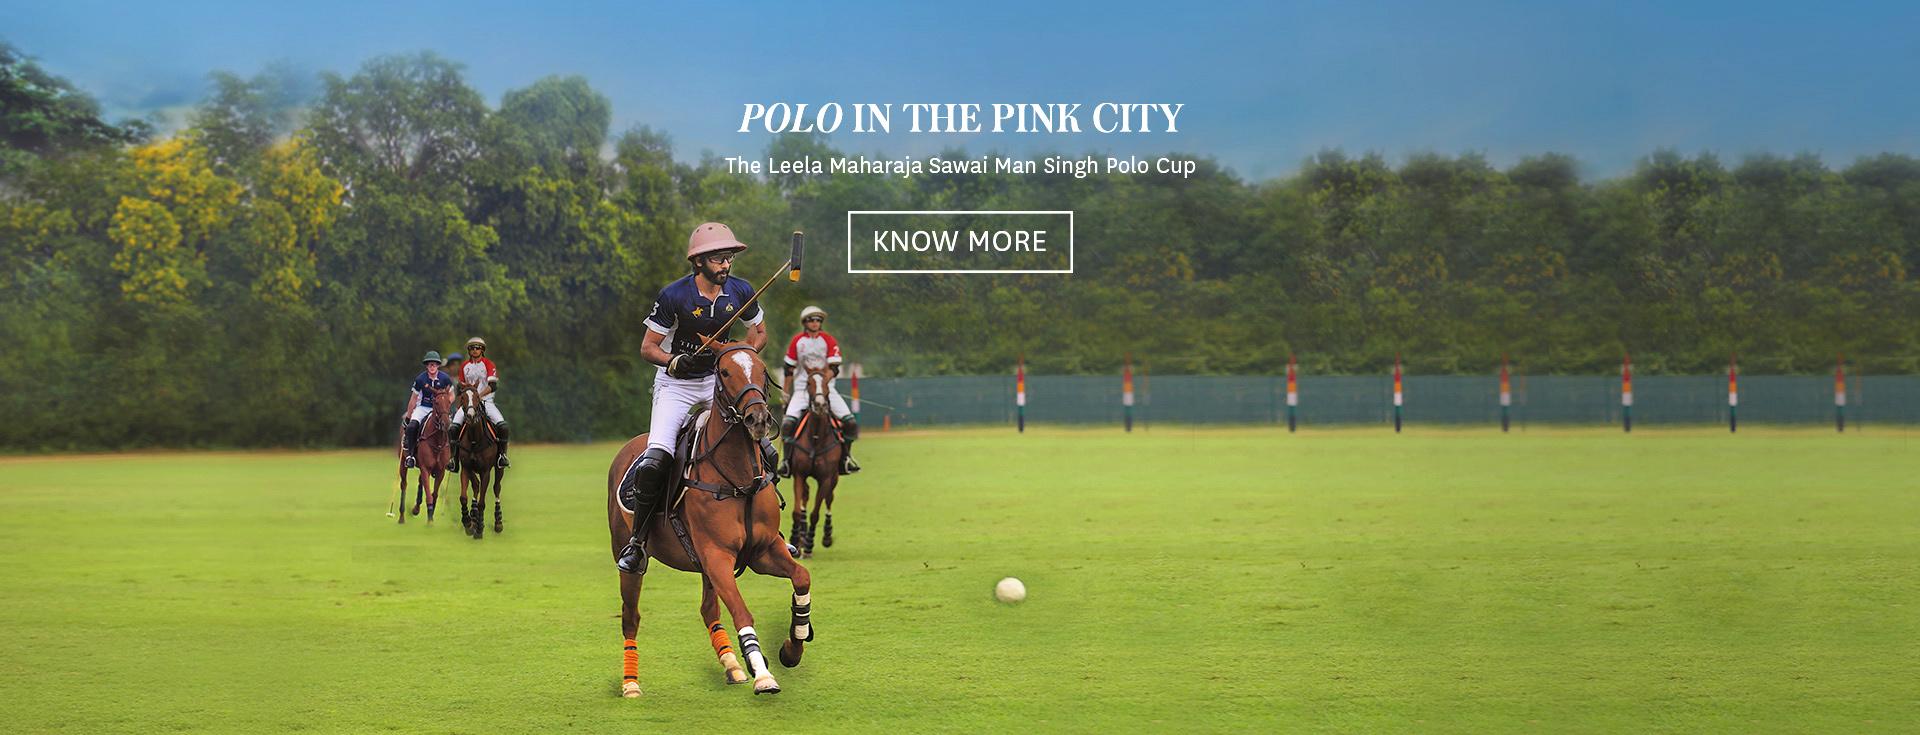 Polo in the Pink City